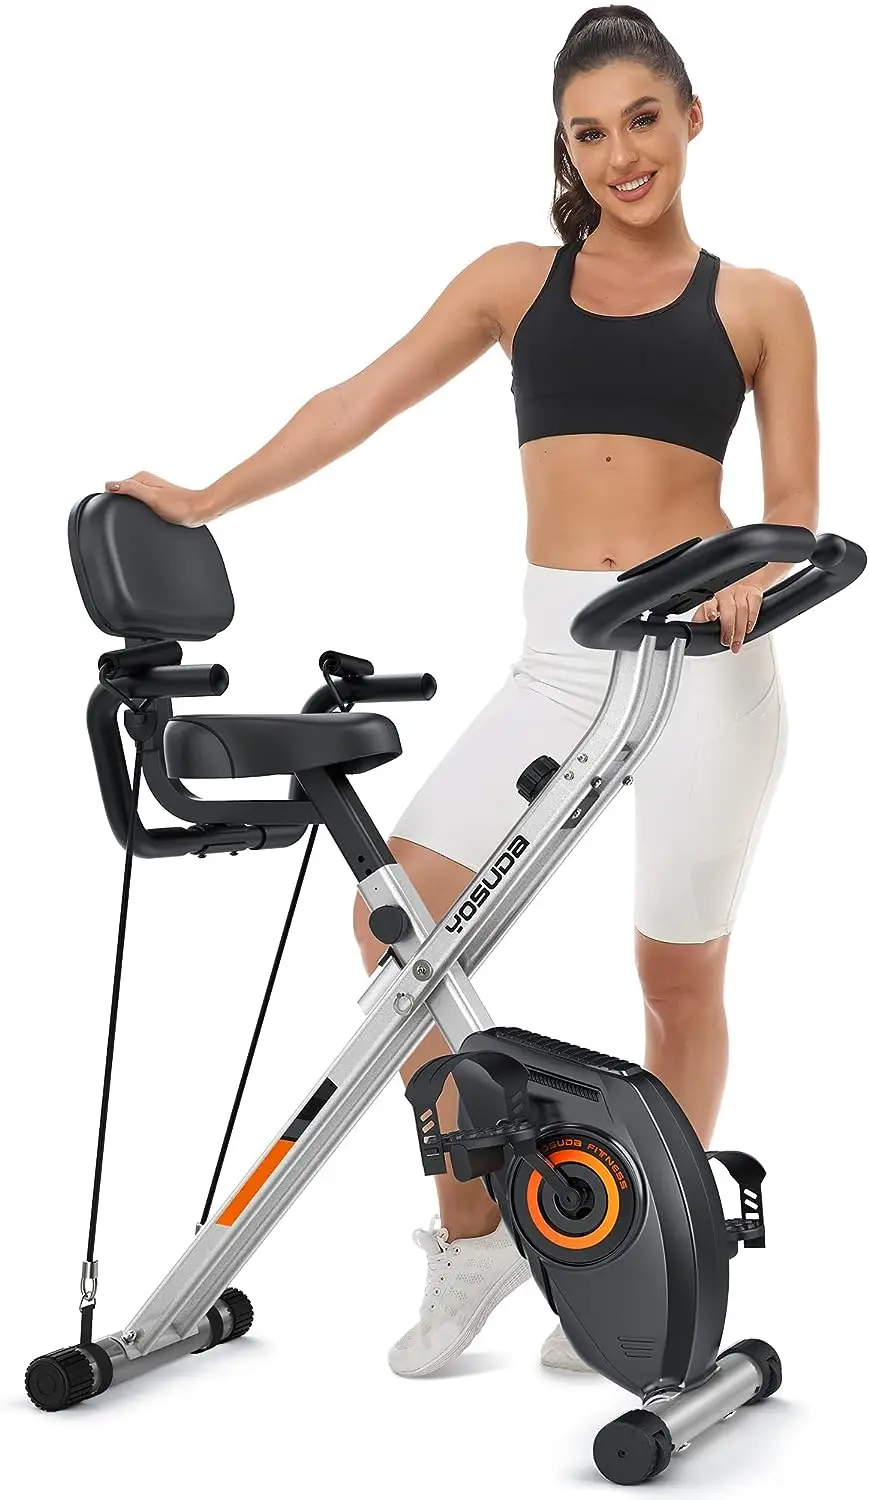 

Exercise Bike - 3 in 1 Upright Indoor Cycling Bike and Recumbent Exercise Bike, Foldable Stationary Bike with Large Comfortable